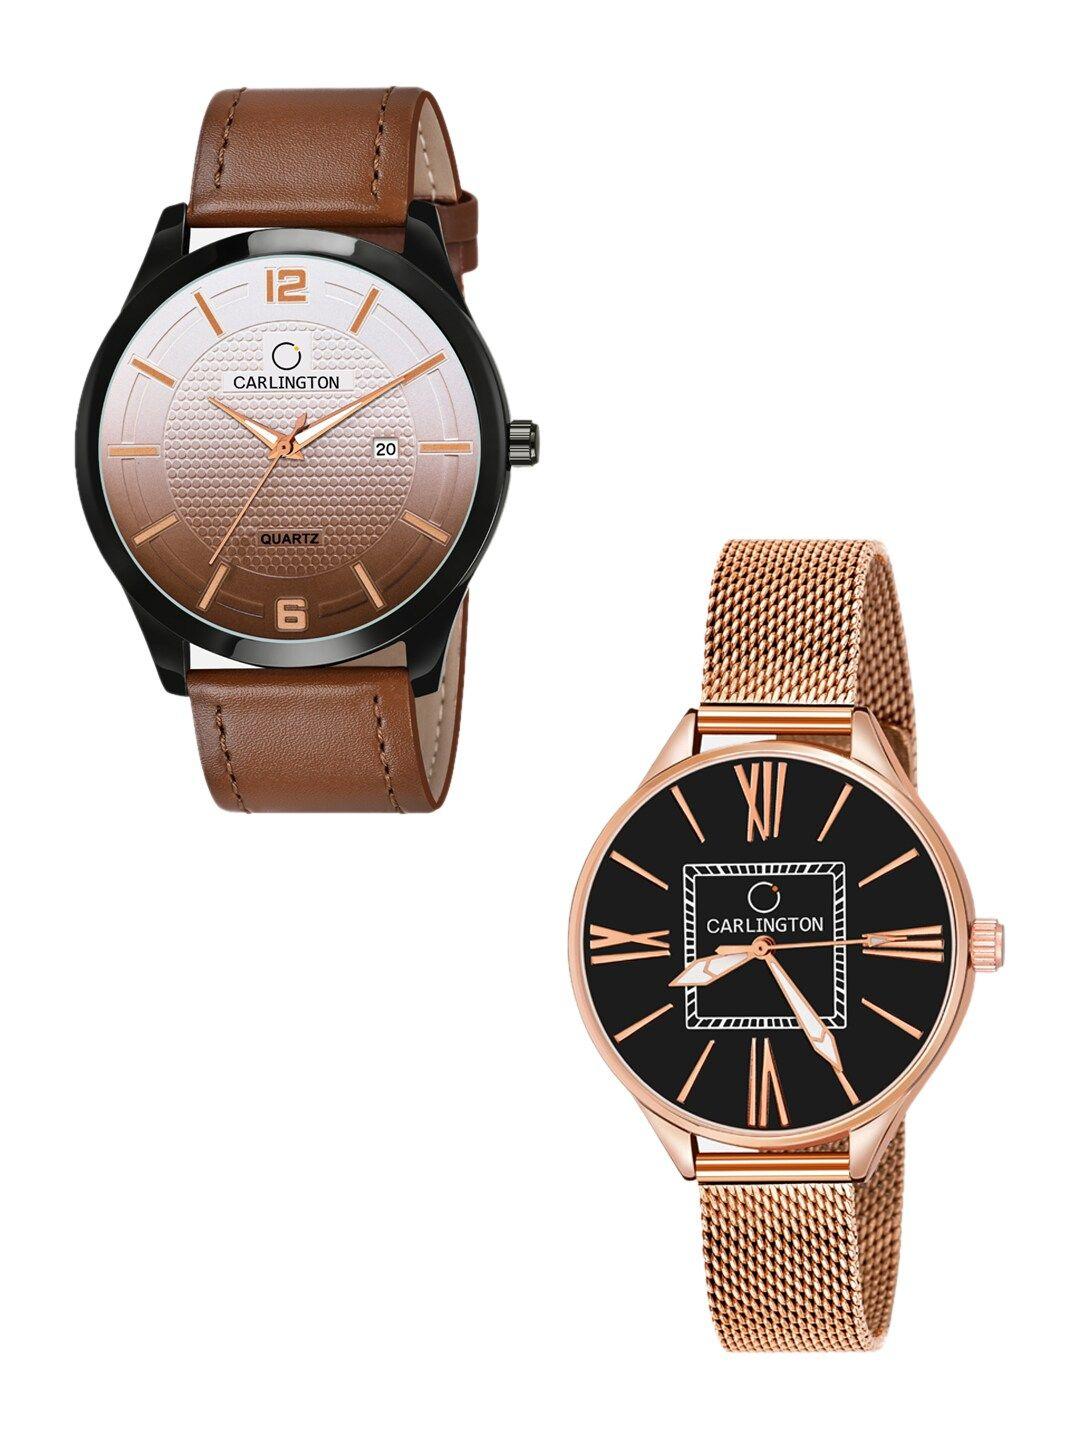 carlington-unisex-his-and-her-watches-watch-combo-ct1010-tan---ct2015-roseblack